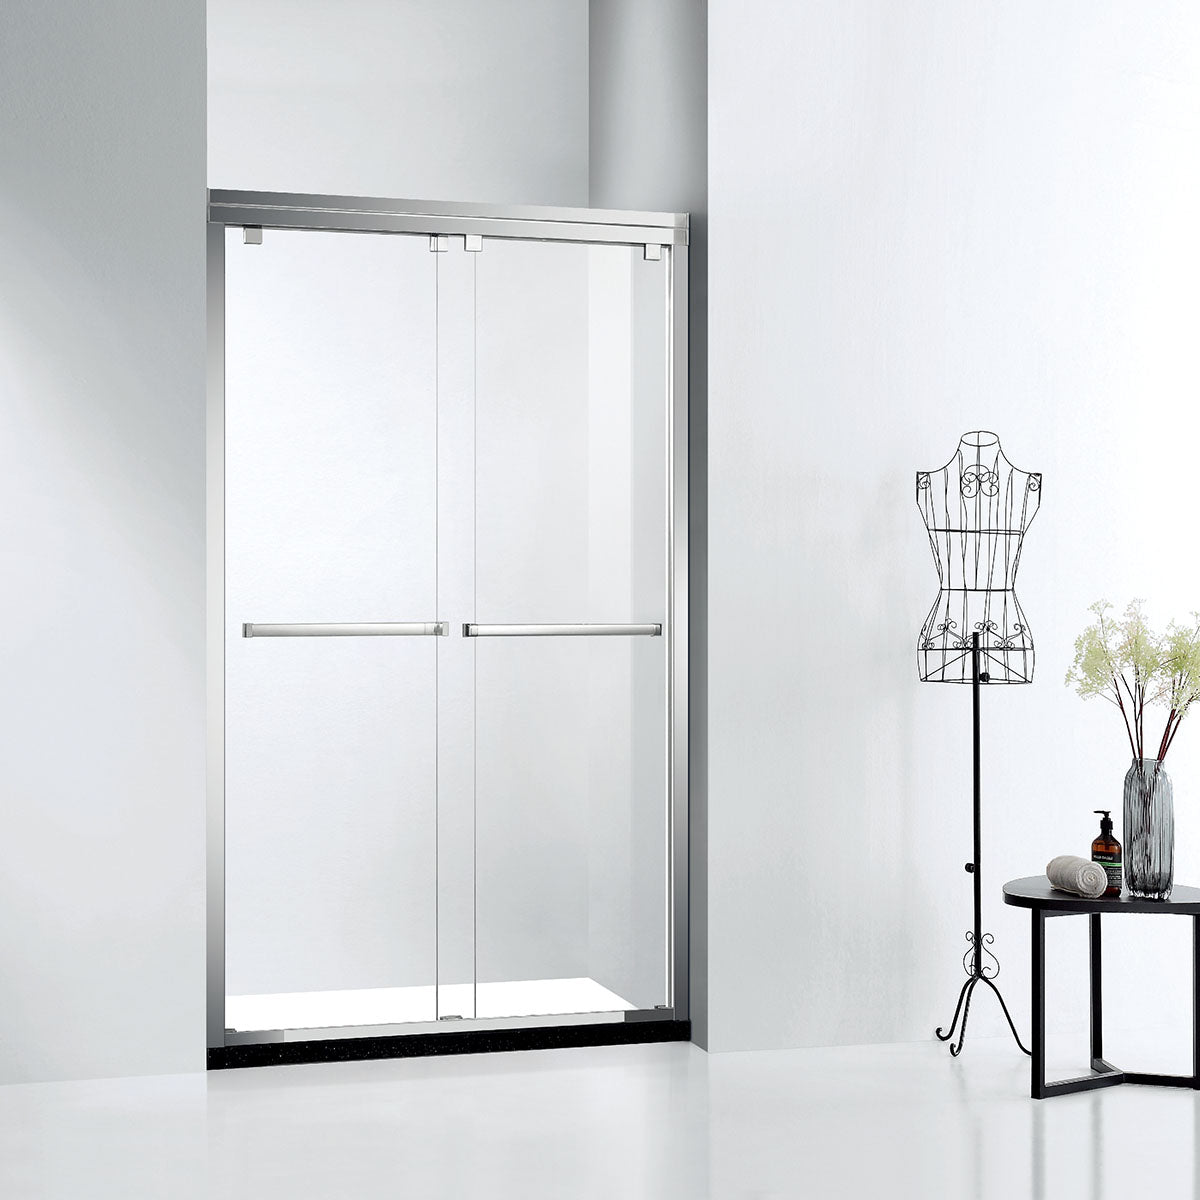 72" ASD Series Bypass66" Shower Door with Klearteck Treatment (5/16" Thickness) Low Ceiling 72" (Silver /Chrome)